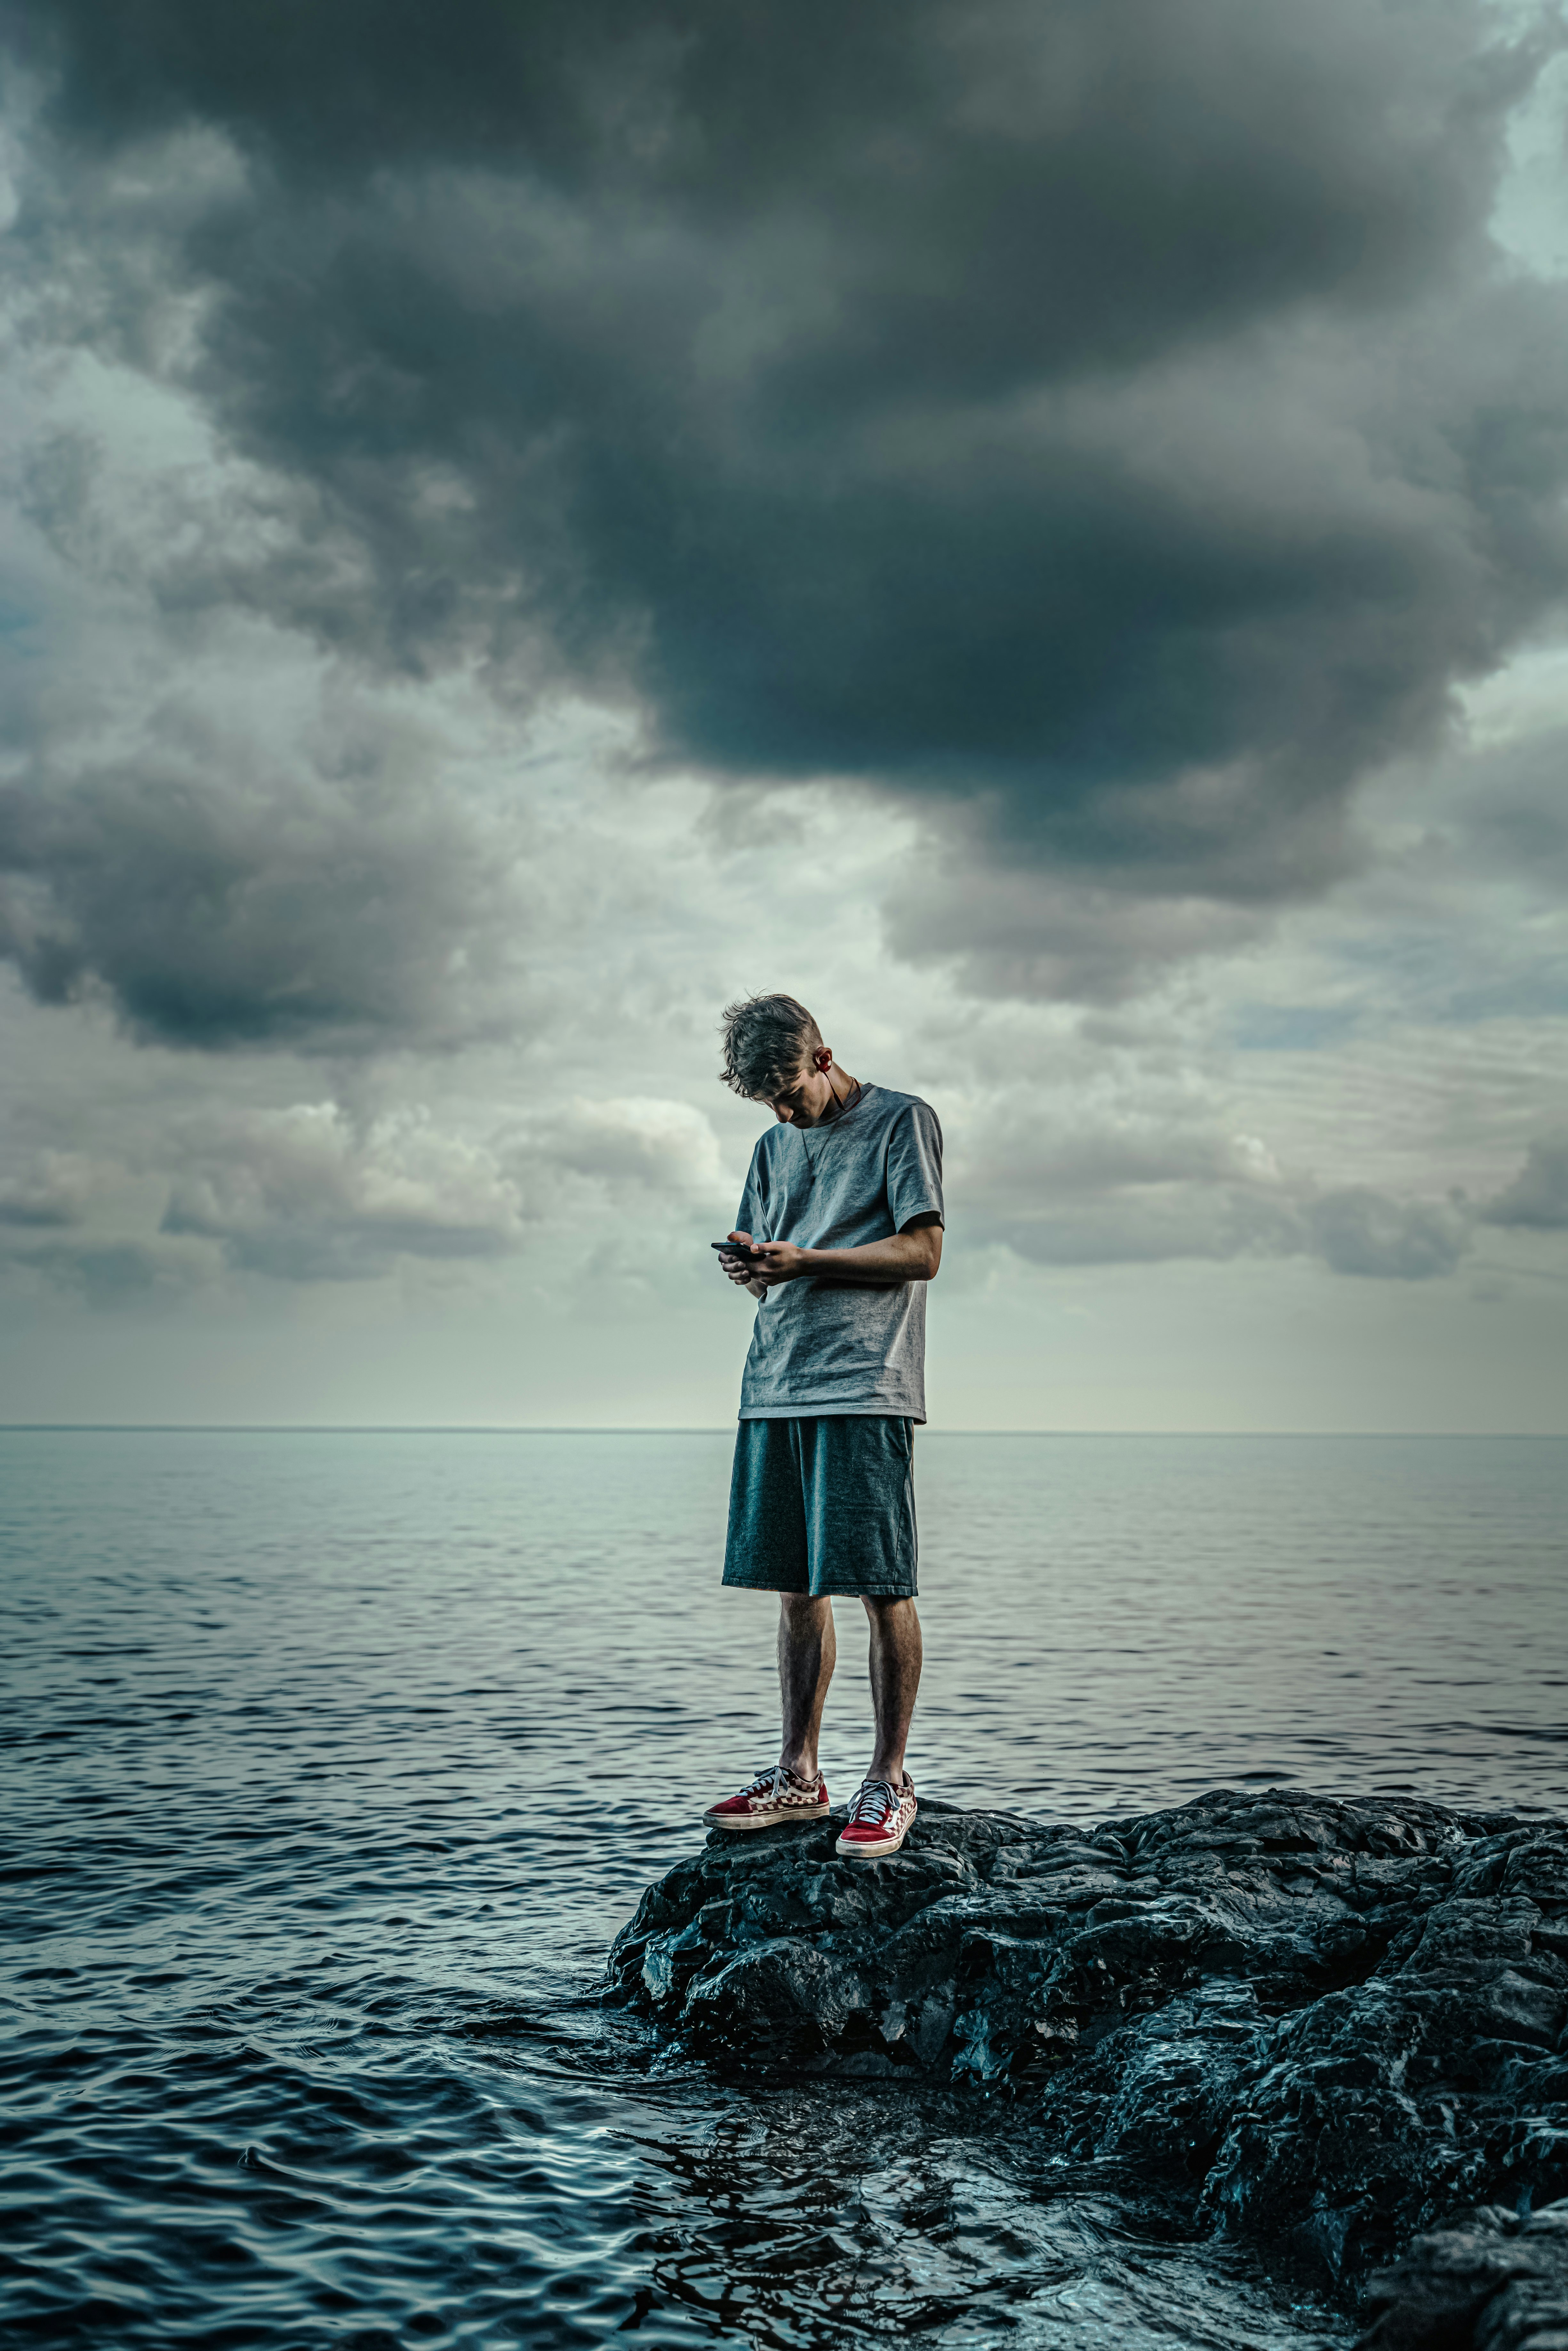 Tried to capture a portrait of my son on Lake Superior this weekend... but ended up capturing the story of an entire generation.

Surrounded by beauty and uncertainty...yet totally distracted.